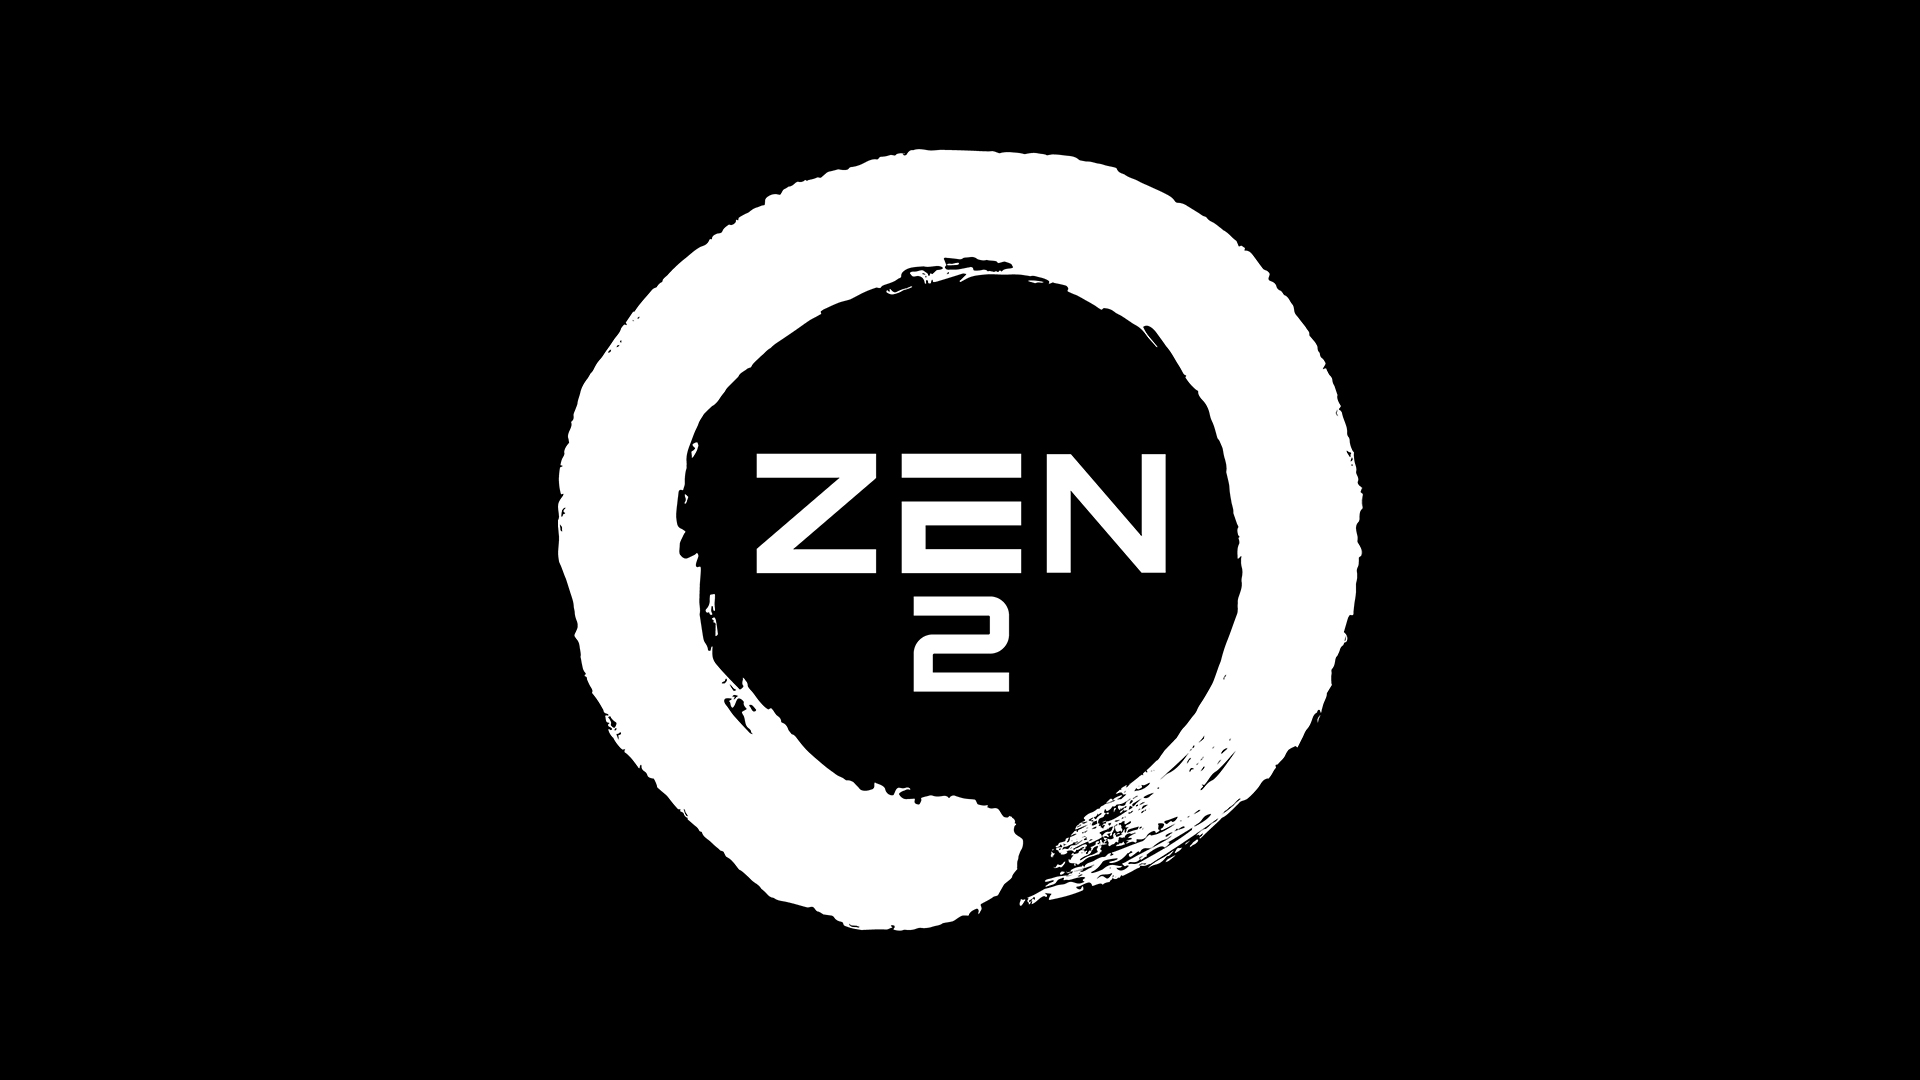 Sketchy Zen 2 Retail Listings Pop Up Online Claiming Specs For Ryzen 3800x And More Kitguru